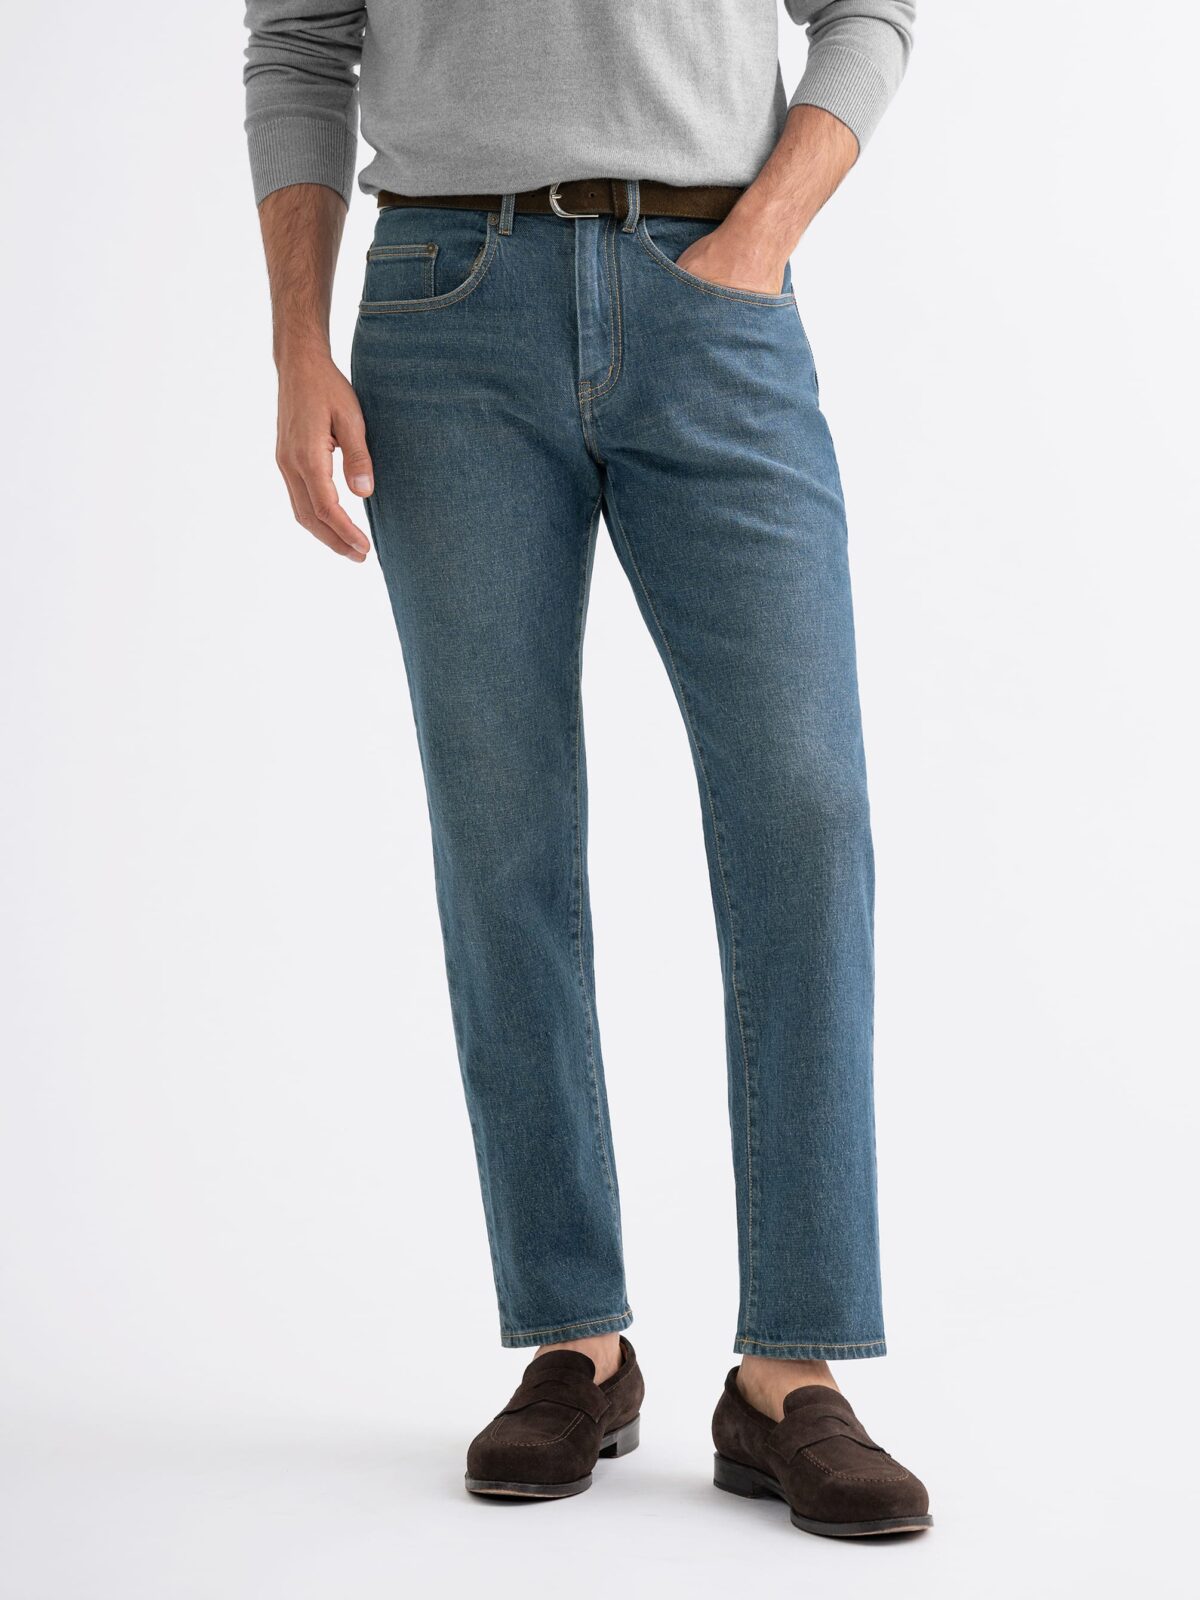 Levi's New 501 Fit Slim Fit Straight Leg Jeans Button Fly Brown, $47